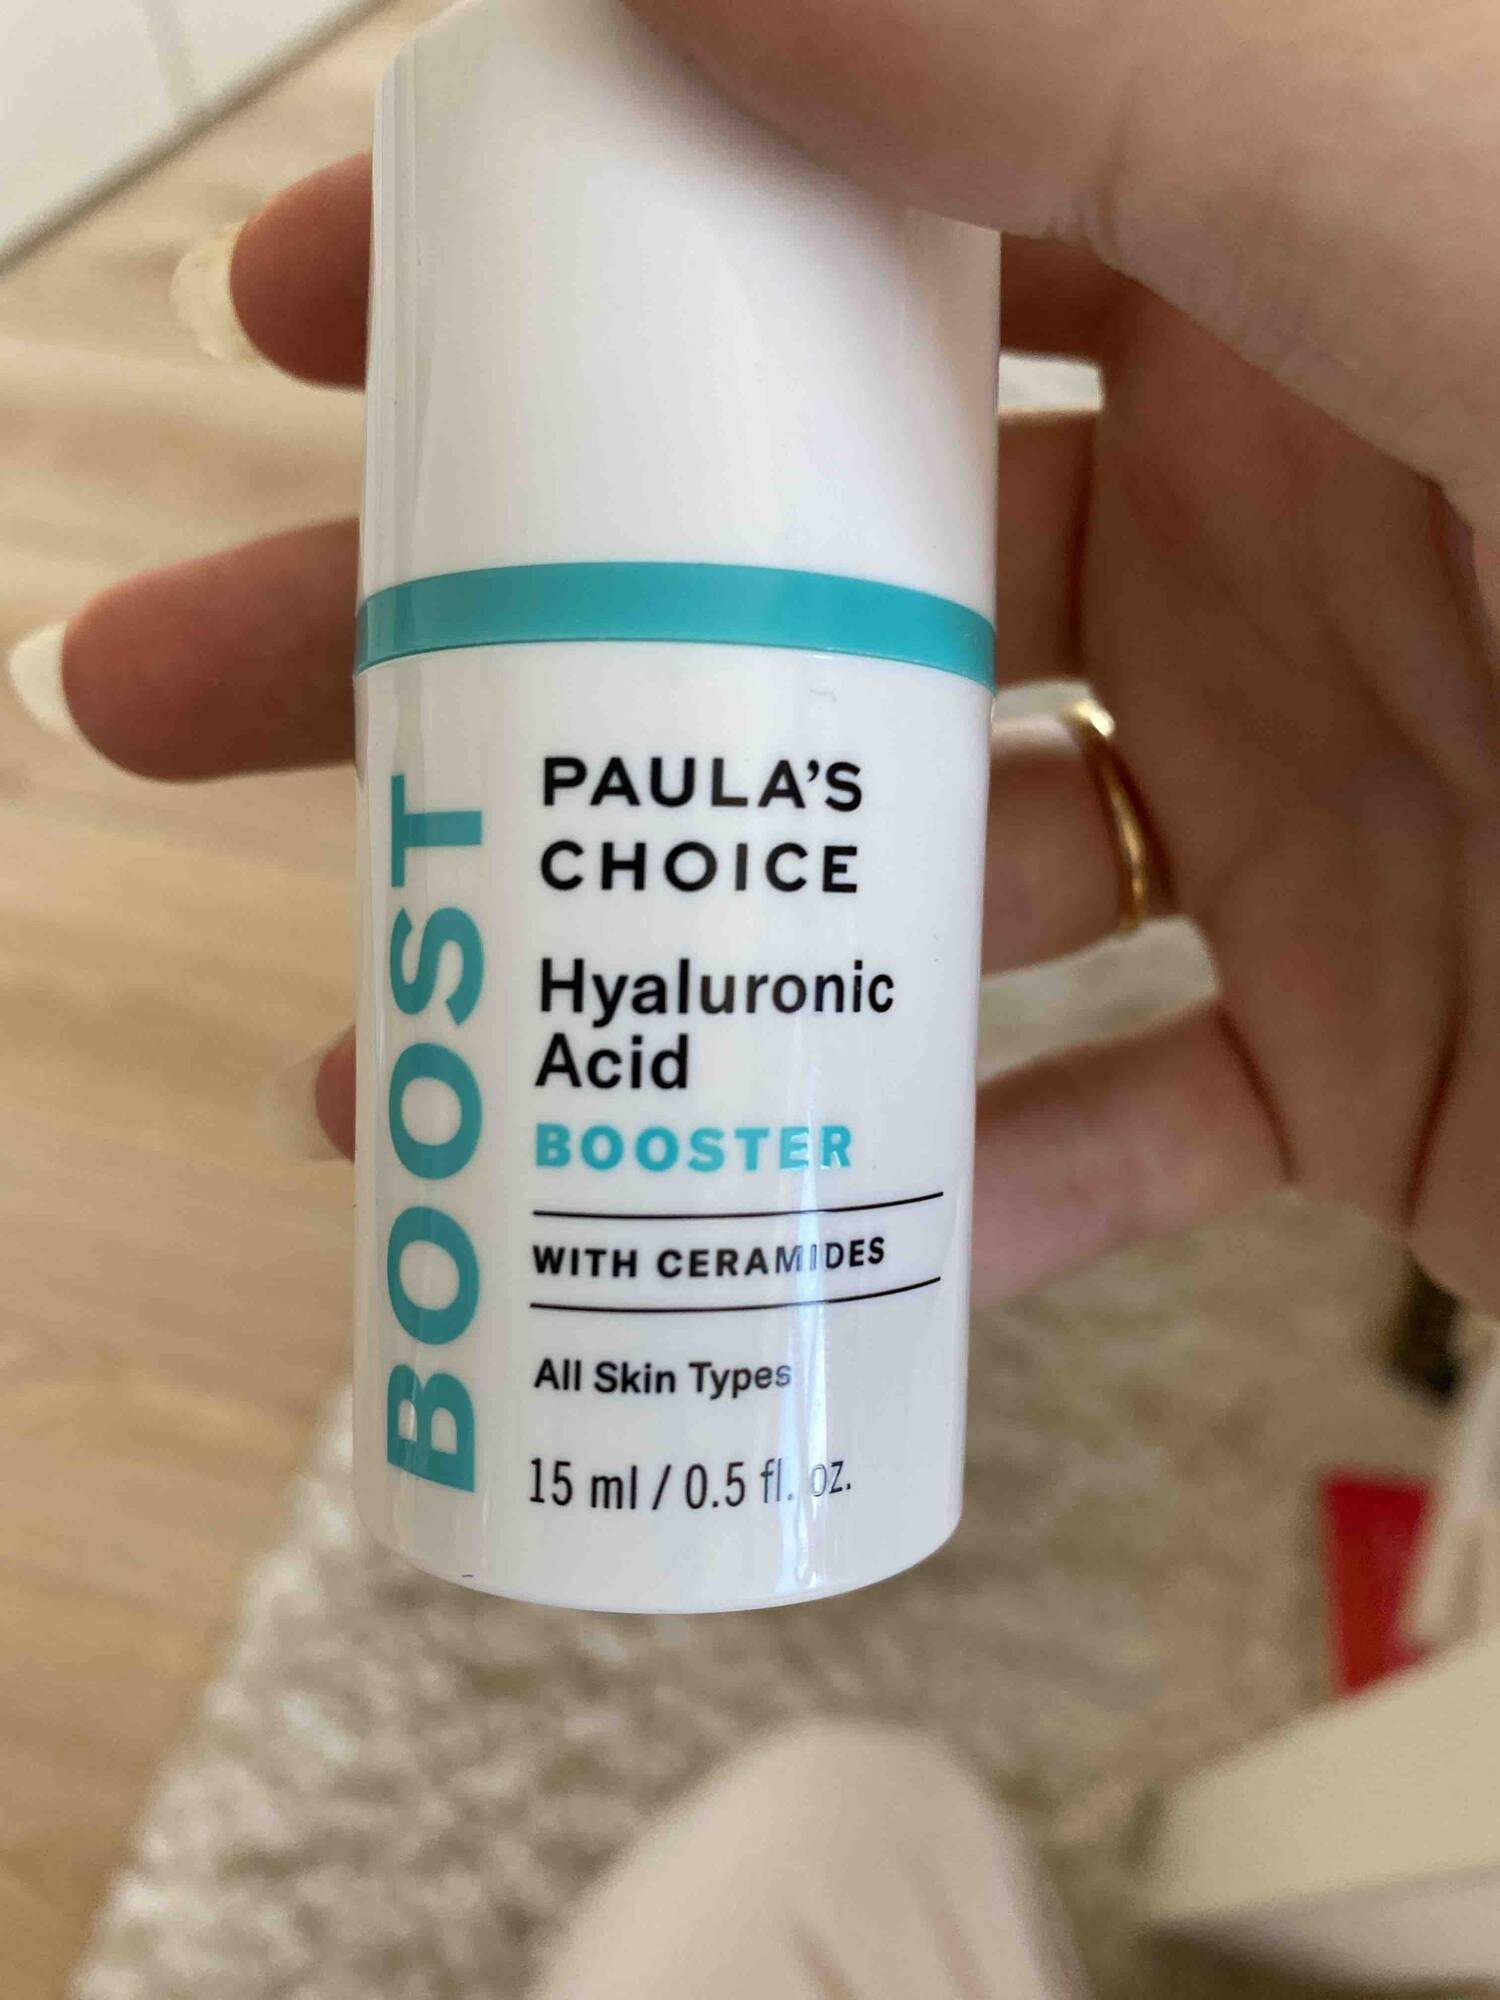 PAULA'S CHOICE - Boost - Hyaluronic acid booster with ceramides